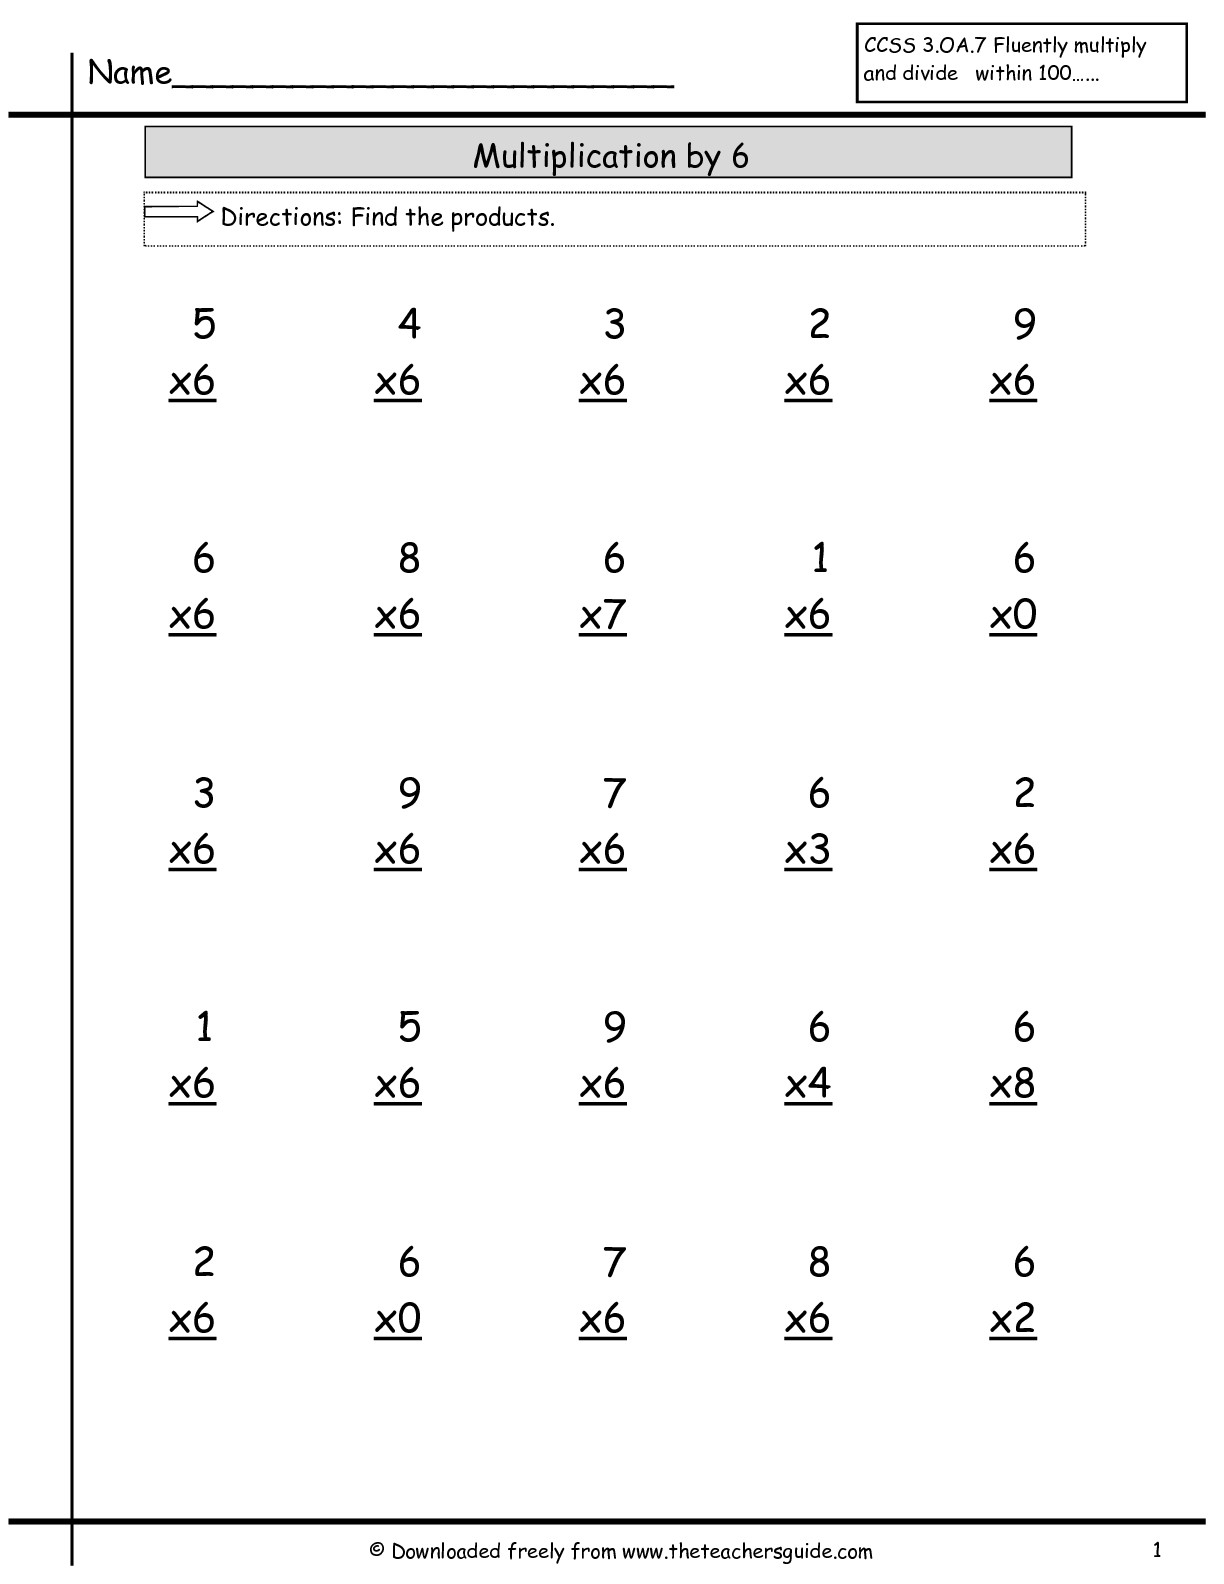 Multiplication Facts Worksheets From The Teacher&amp;#039;s Guide pertaining to Multiplication Worksheets Number 6